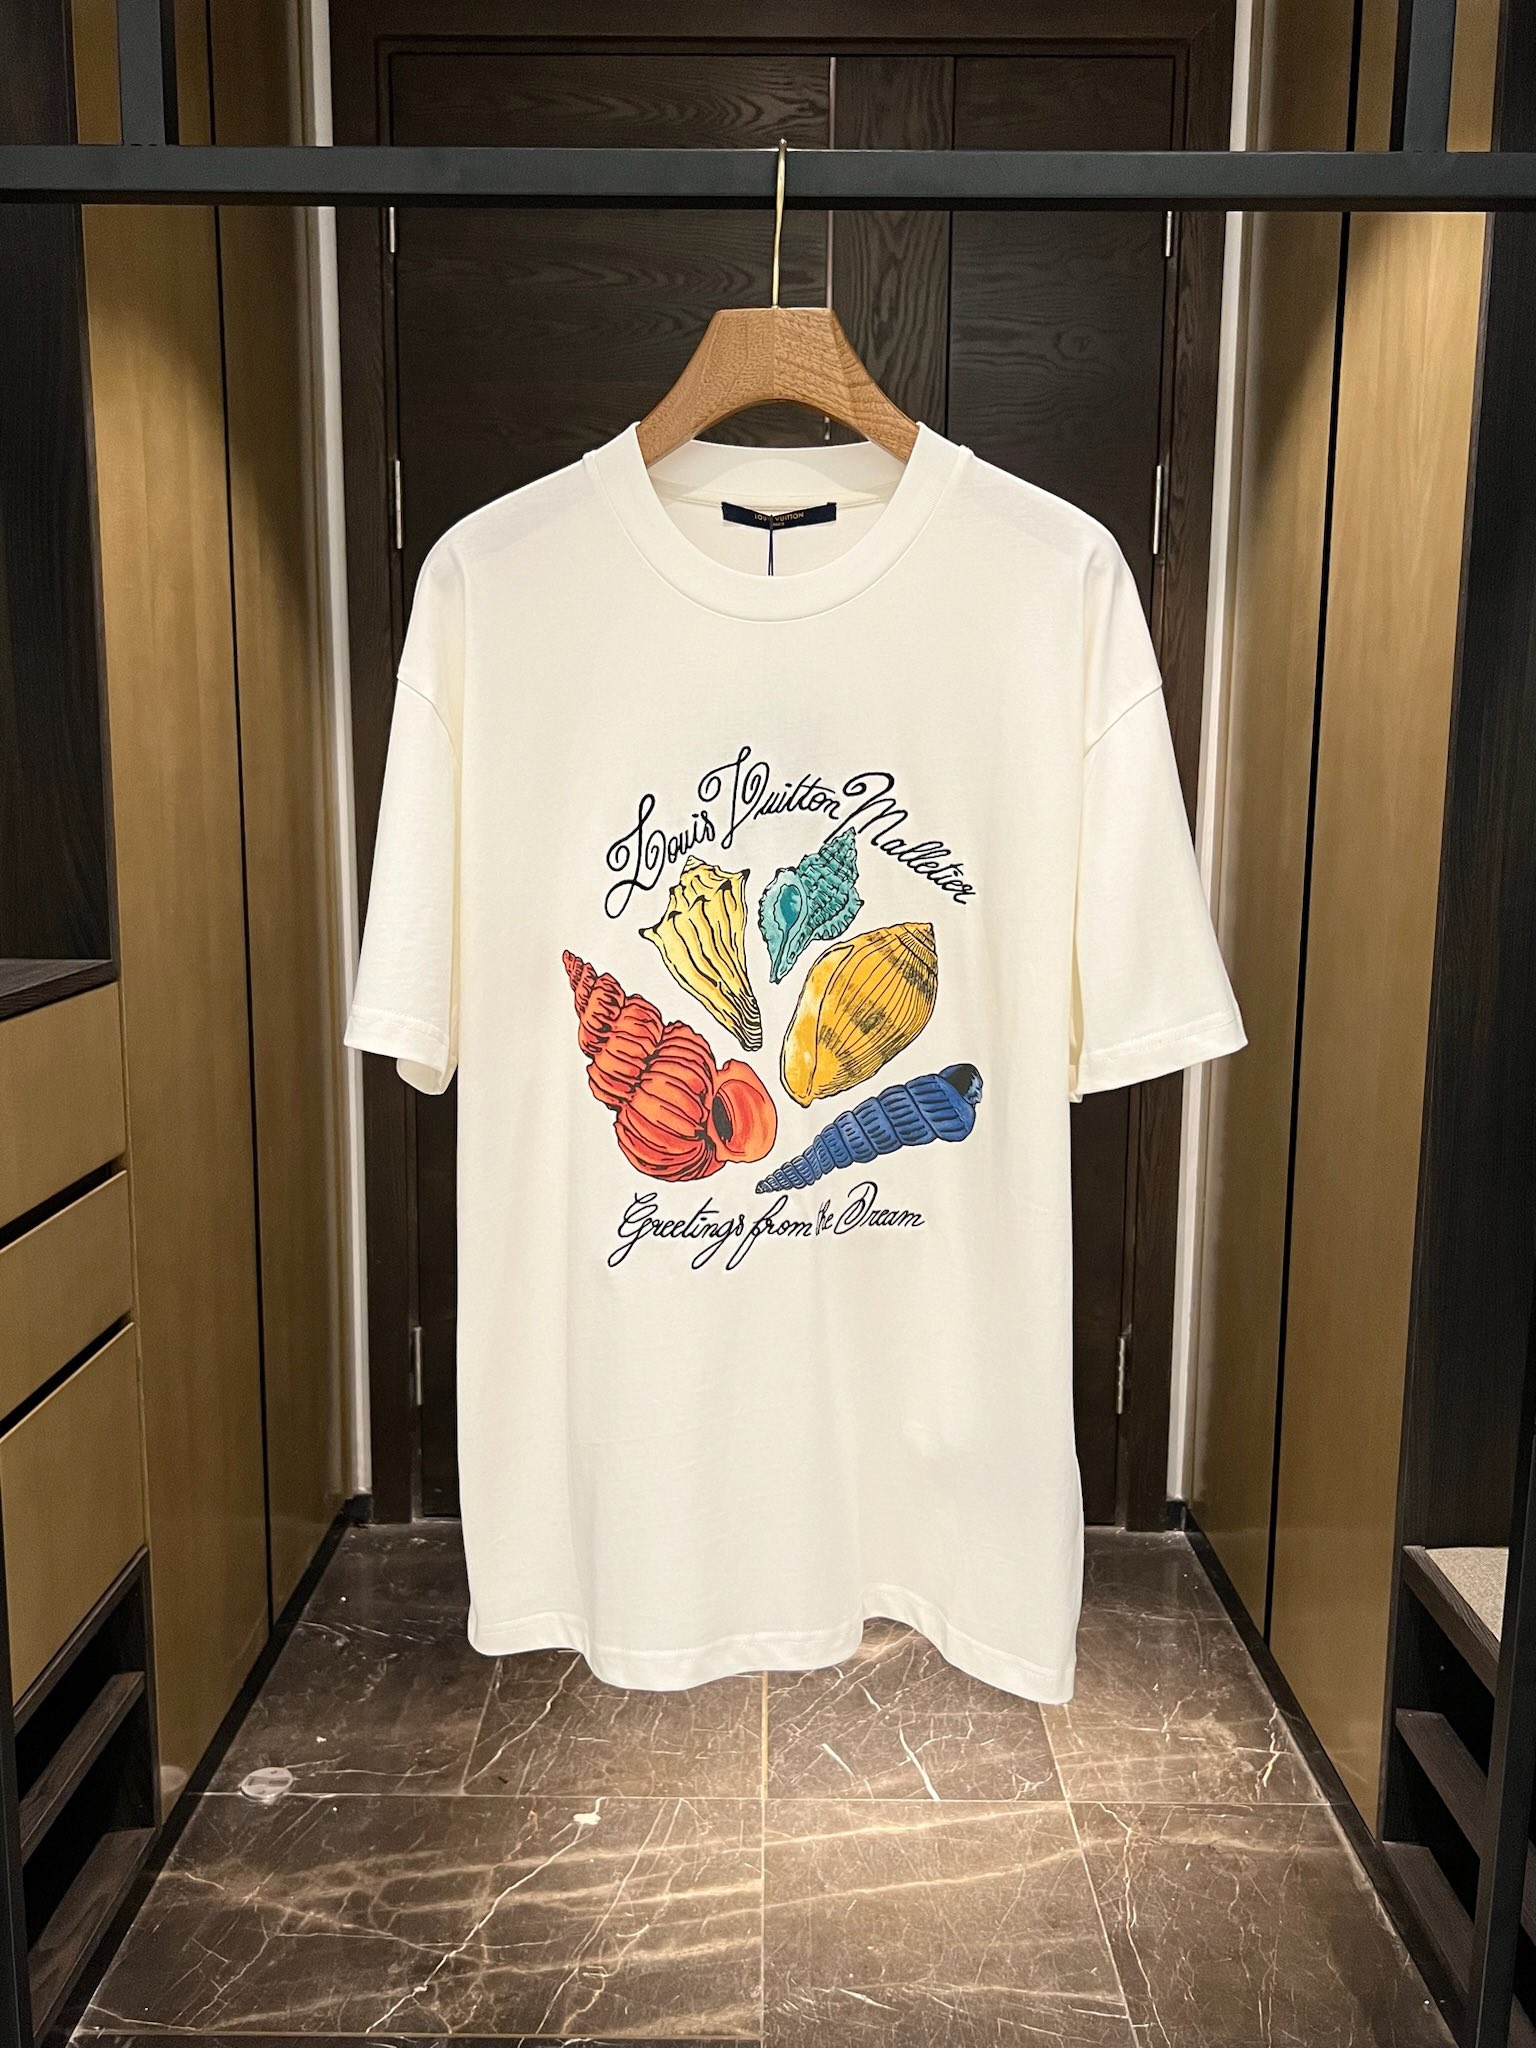 Louis Vuitton Clothing T-Shirt Buy Best High-Quality
 Embroidery Cotton Nylon Summer Collection Vintage Short Sleeve